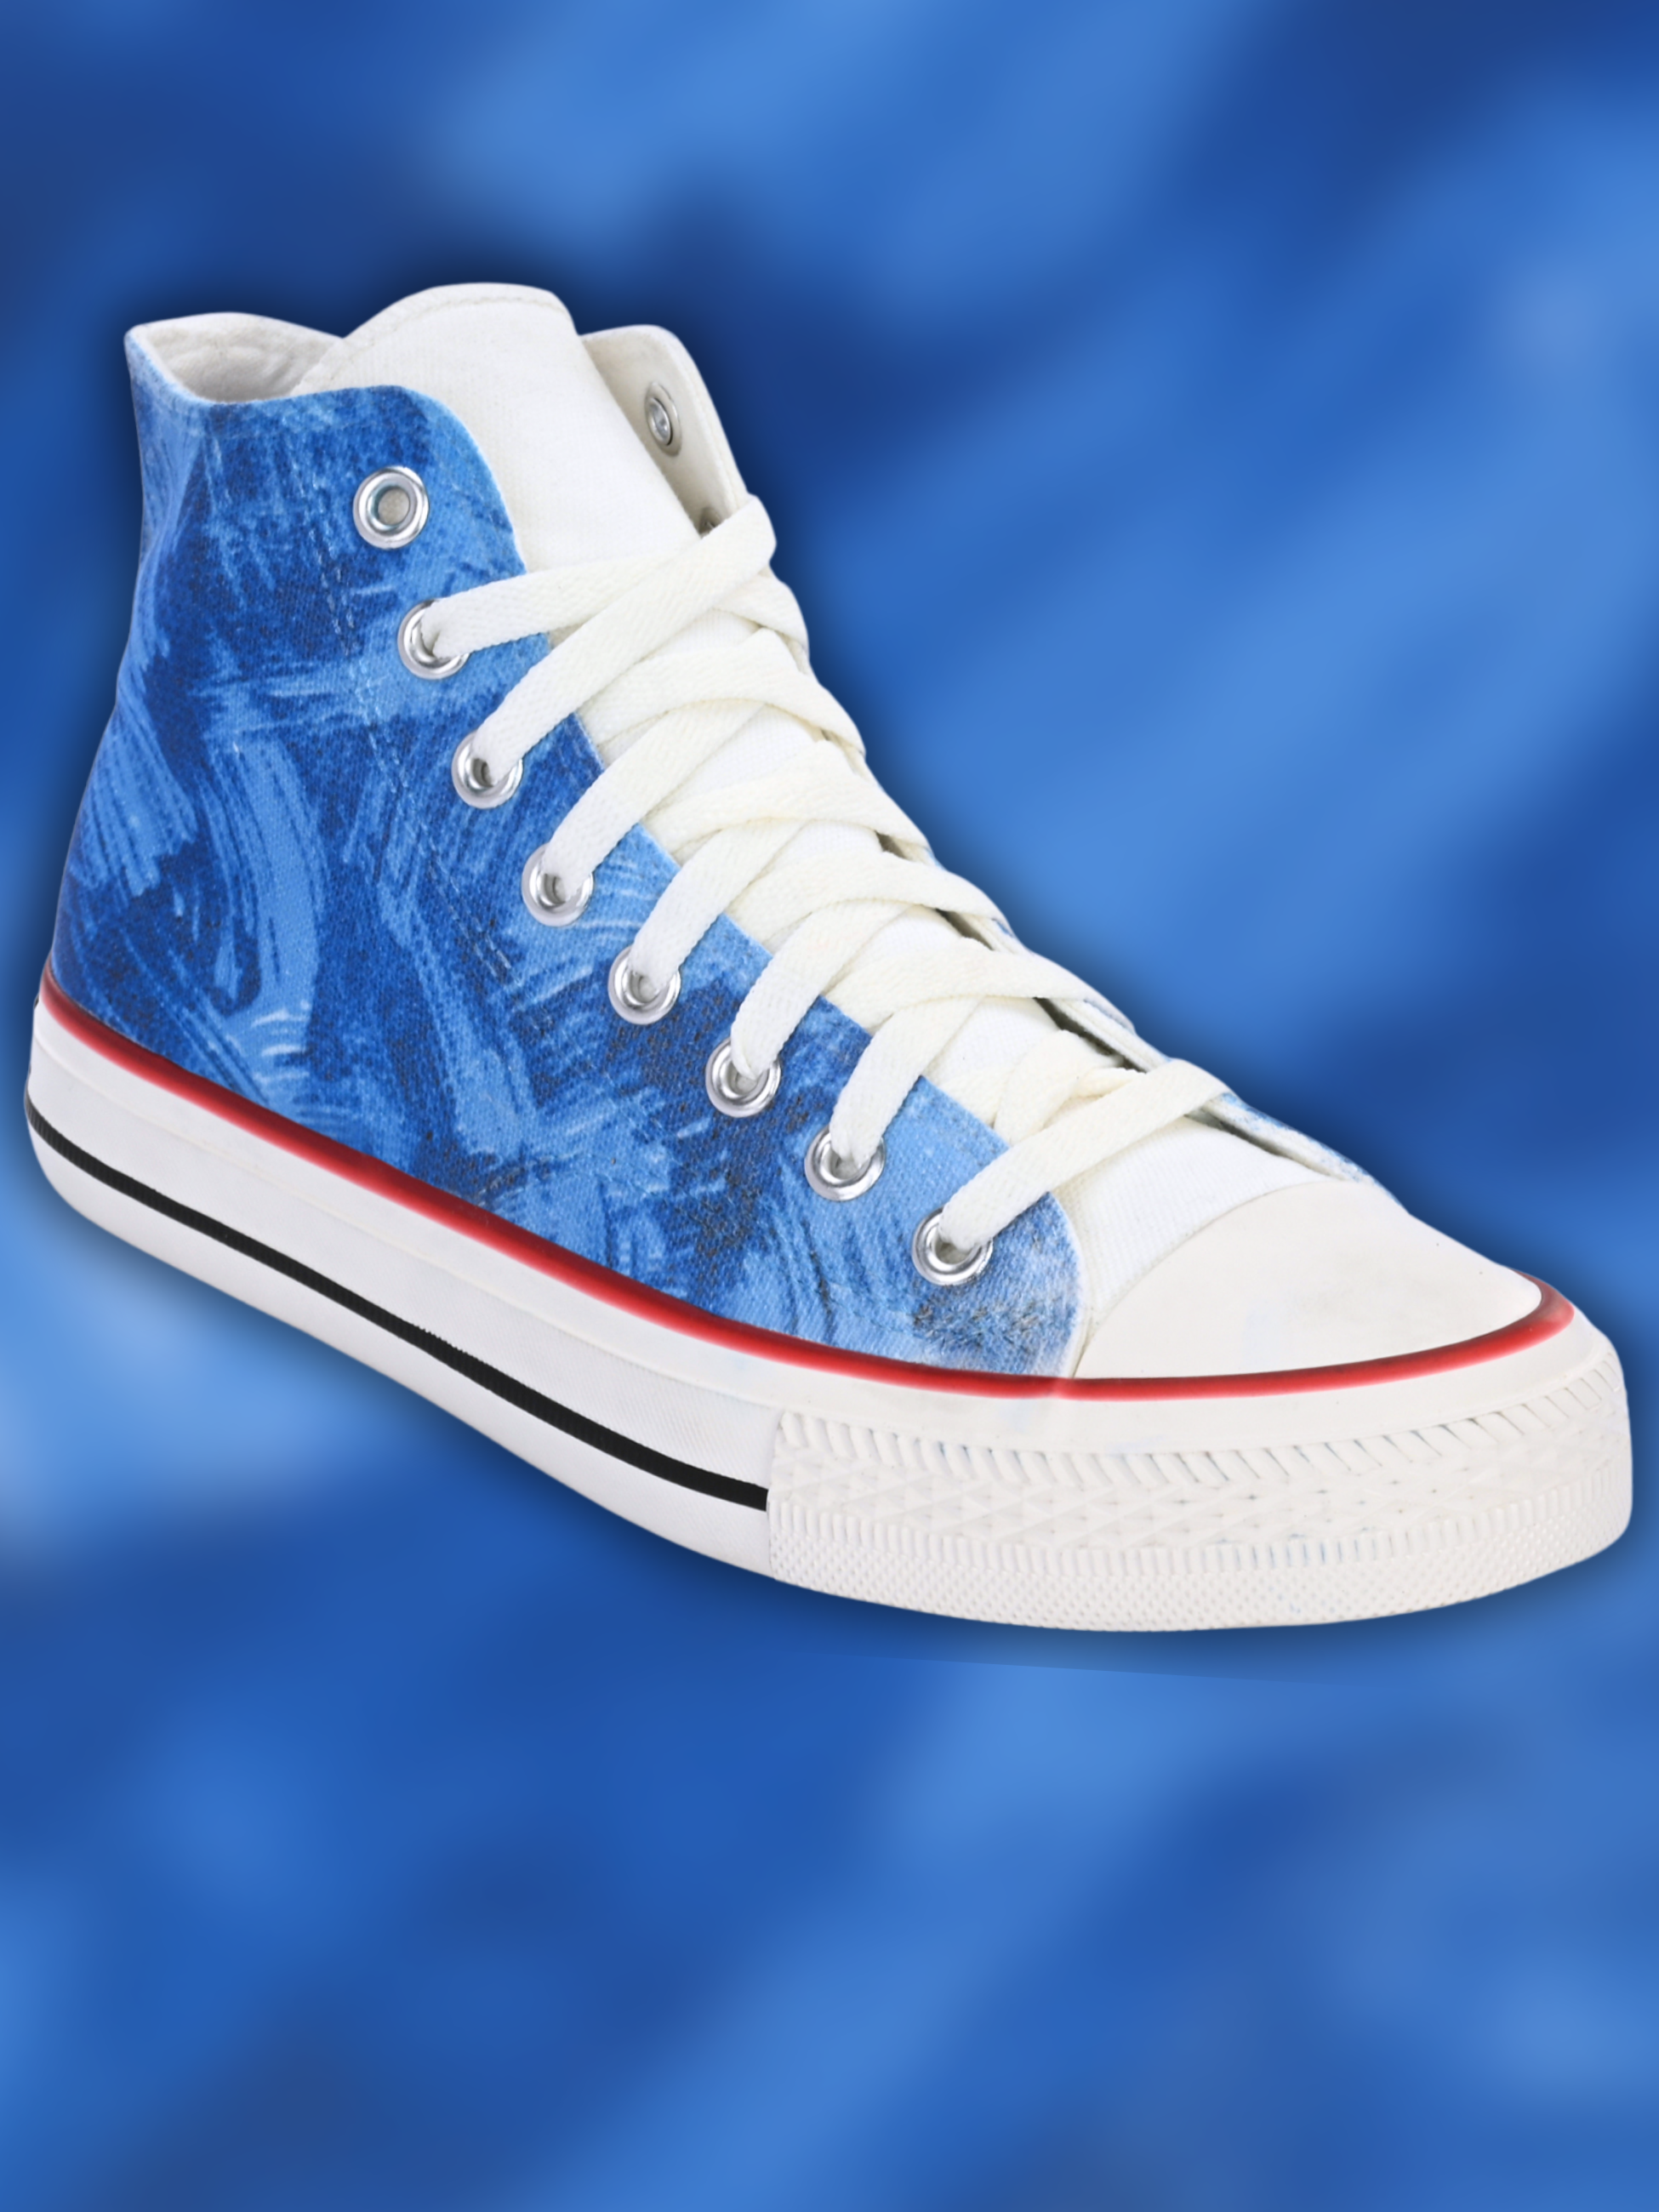 Shop White Chuck Taylor All Star Online - Converse.in